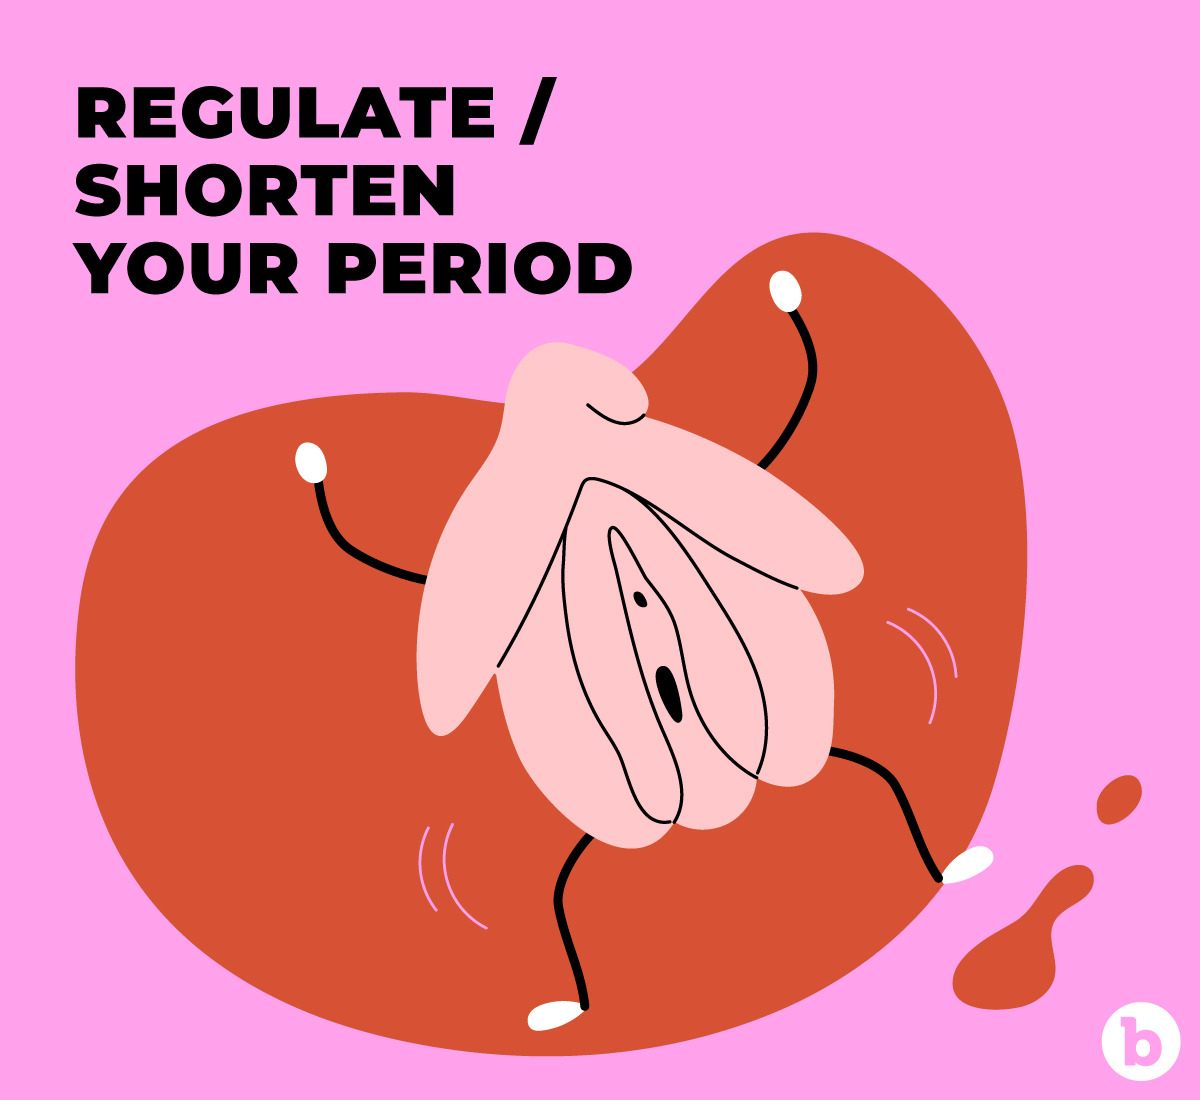 Sexual pleasure can help regulate and even shorten your period